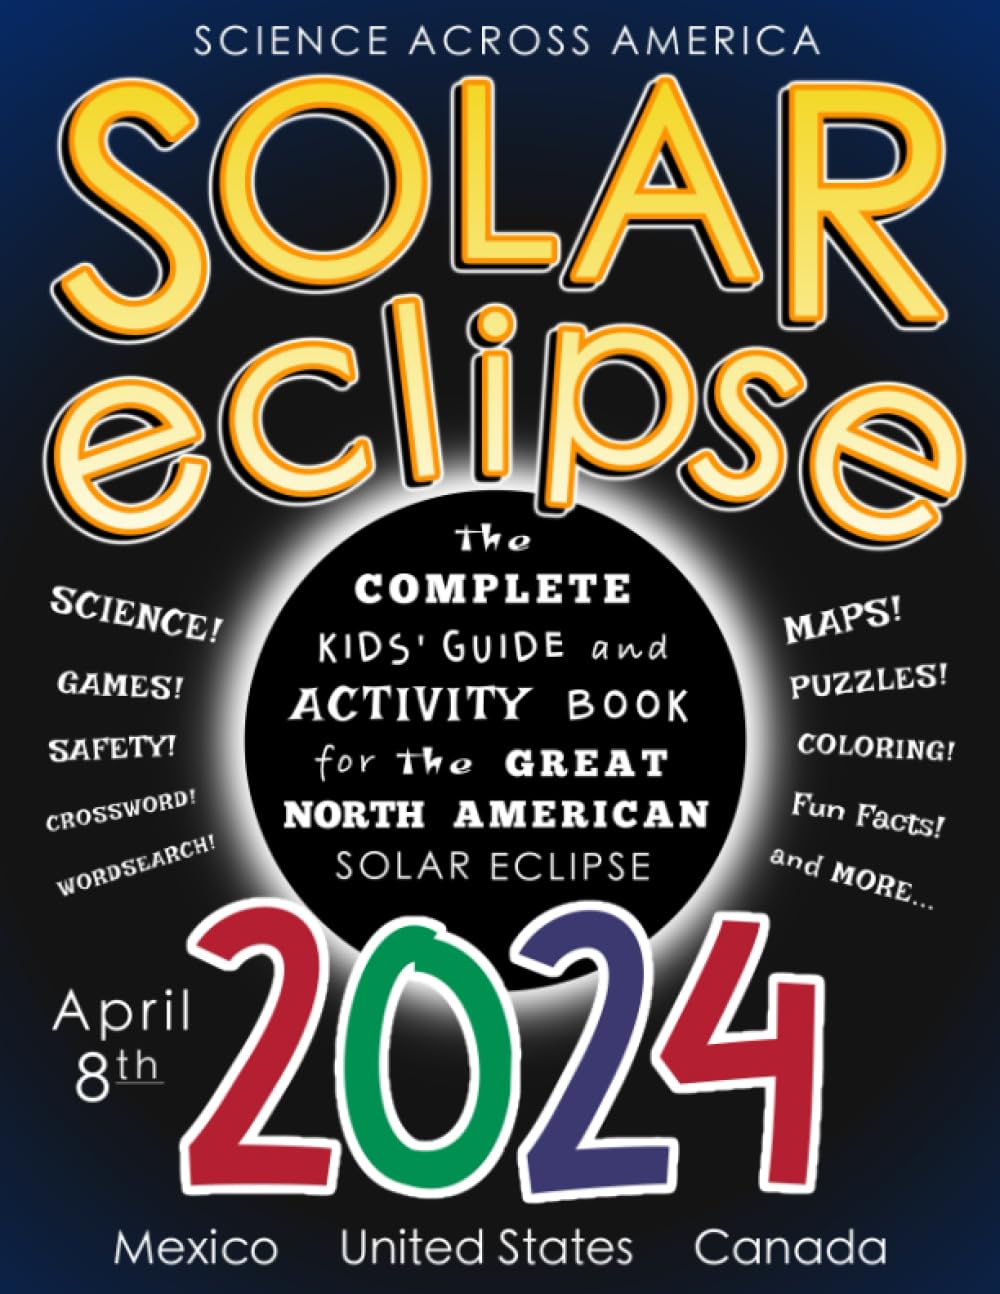 Solar Eclipse 2024: The Complete Kids' Guide and Activity Book for the Great North American Solar Eclipse